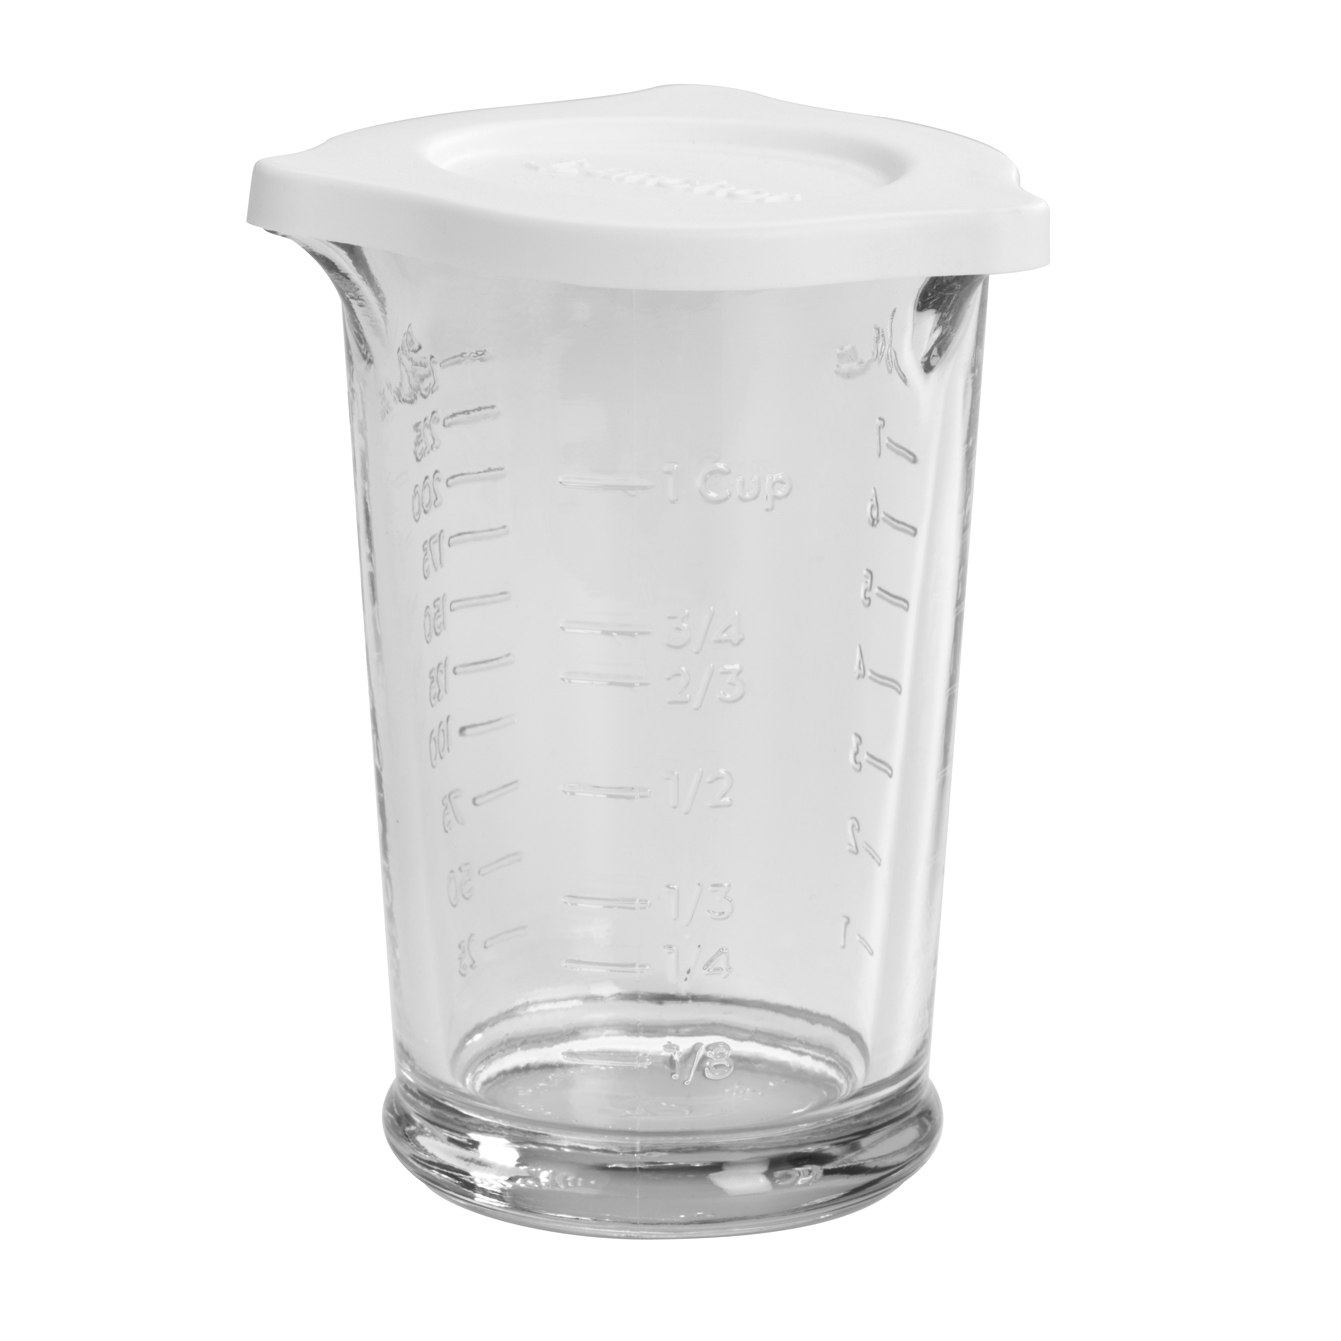  Anchor Hocking Glass Measuring Cup, 32 Oz, Clear: Home